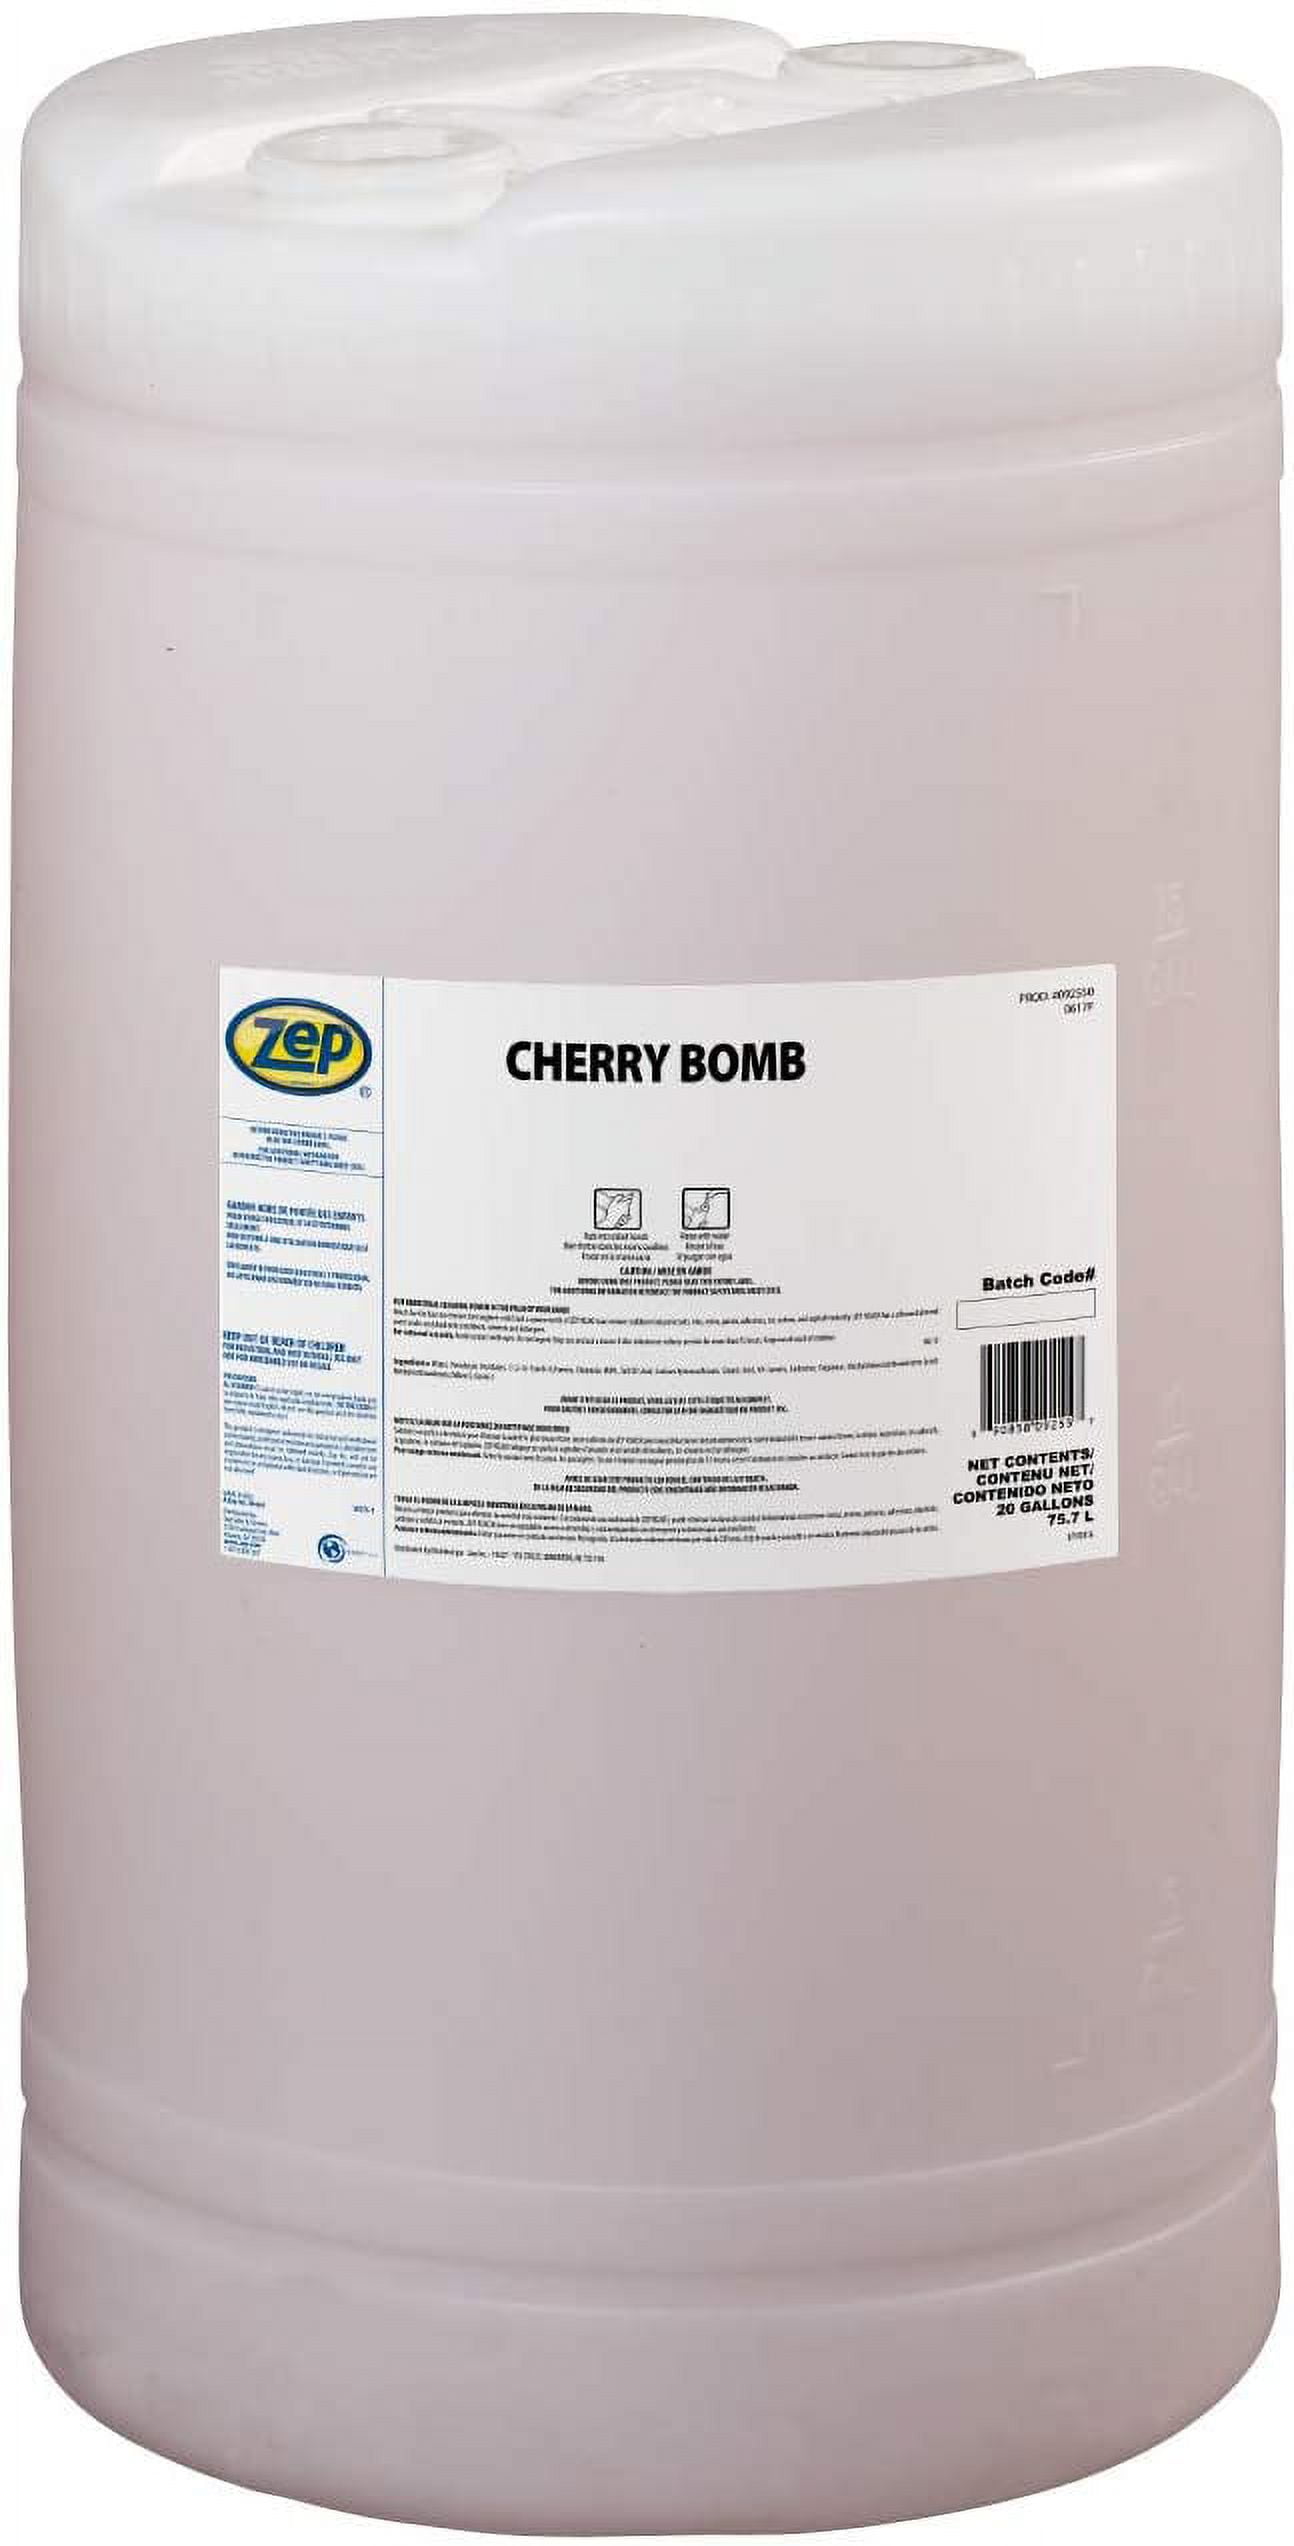 Zep Cherry Bomb Hand Cleaner 1 Gal 95124 (Pack of 2), Size: Gallon (Pack of 2)